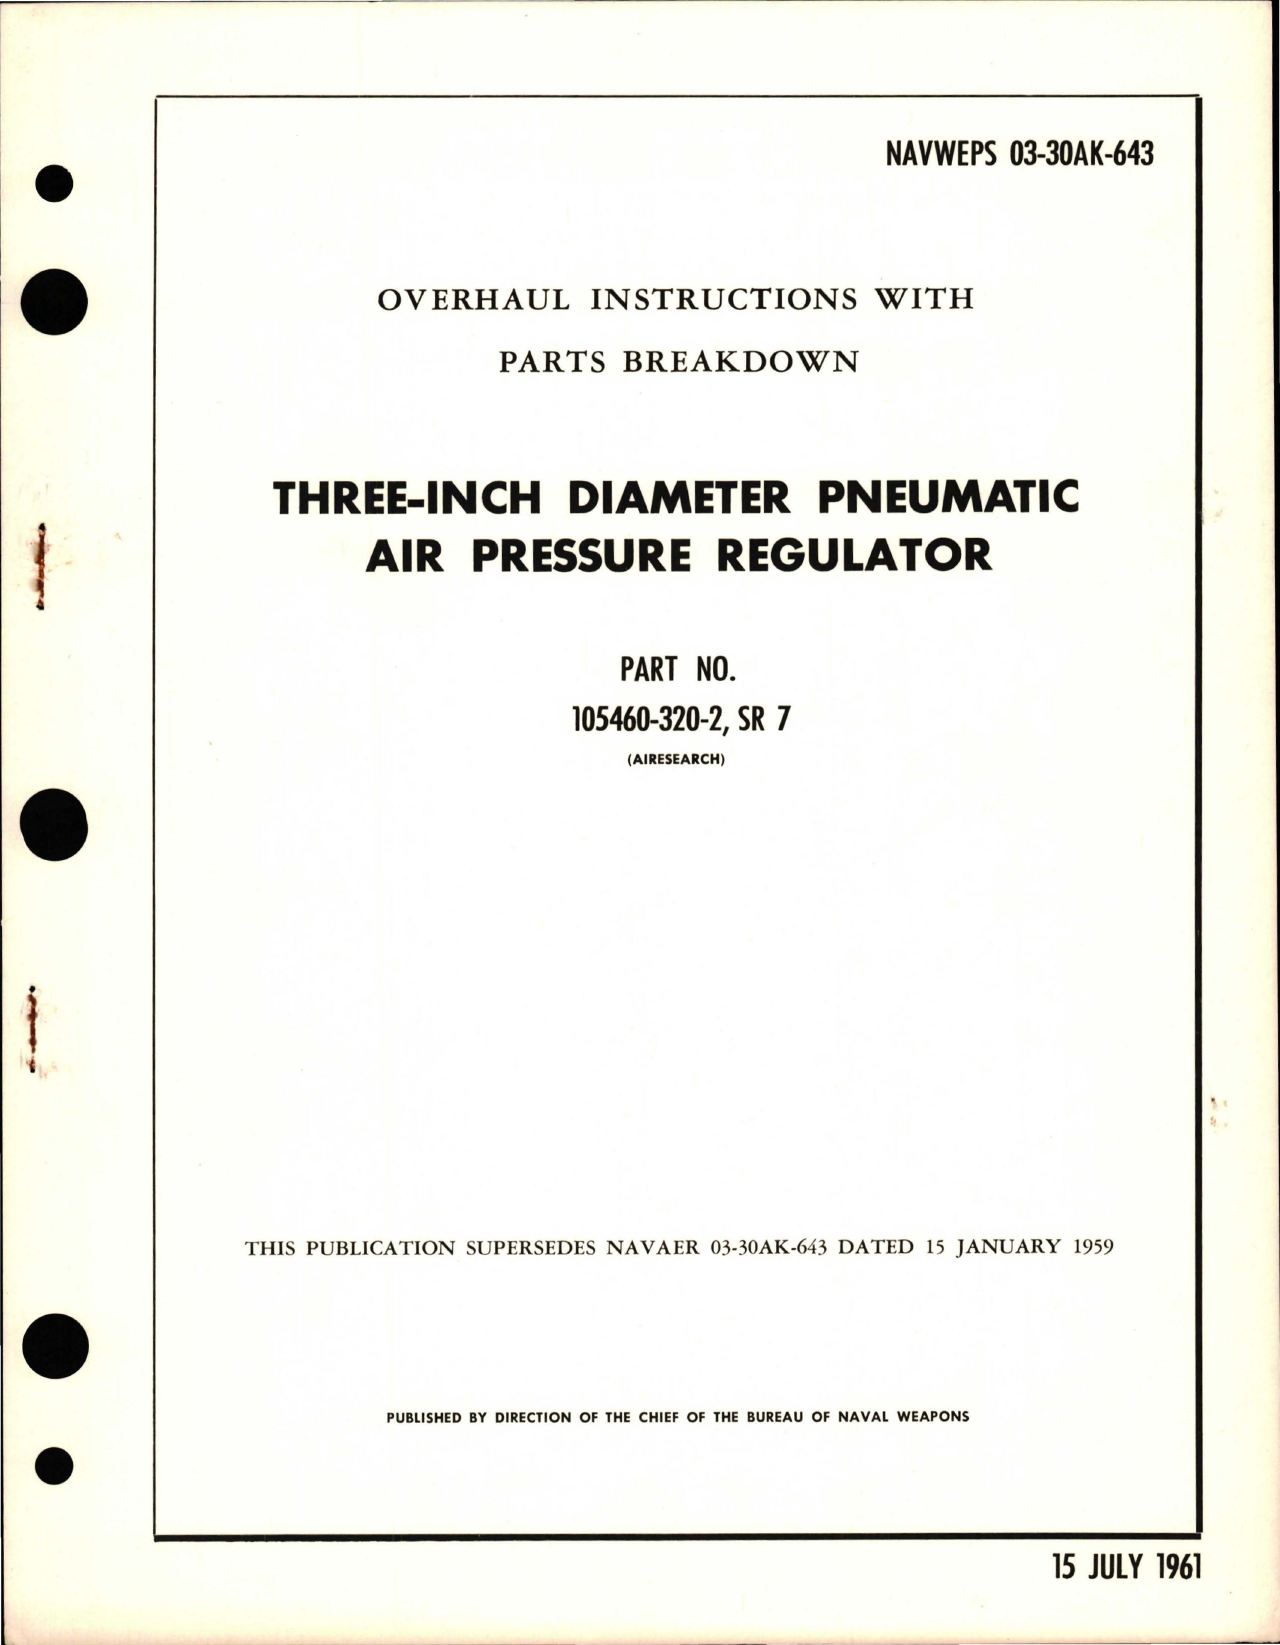 Sample page 1 from AirCorps Library document: Overhaul Instructions with Parts Breakdown for Pneumatic Air Pressure Regulator - 3 inch Diameter - Part 105460-320-2, SR 7